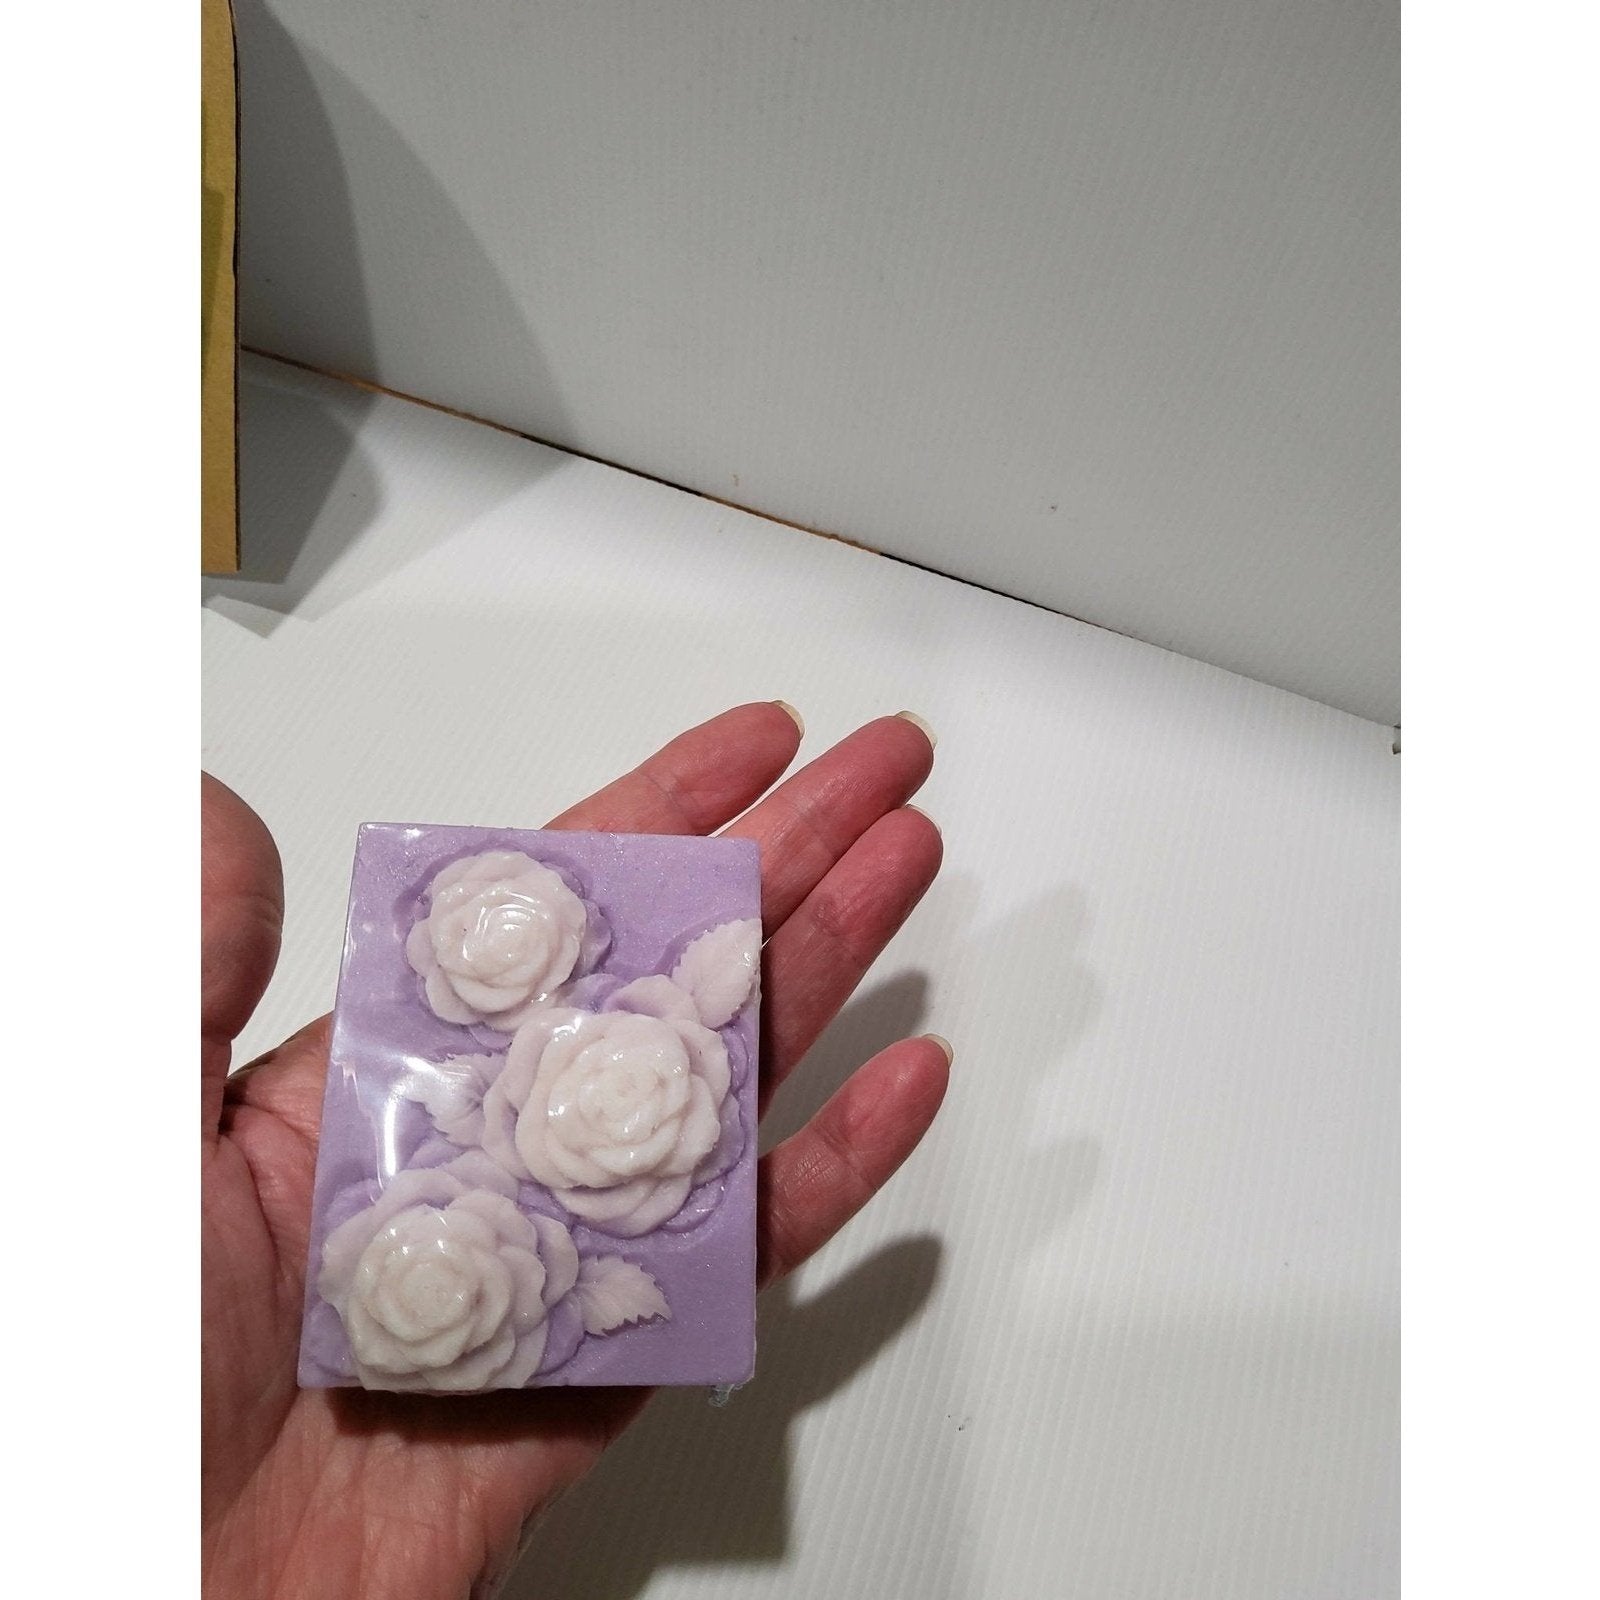 Handmade Soap - Square - Flowers x 3 Soaps - Giftbox - No Palm Oil - Vegan Friendly - Free Shipping - AMD Touring